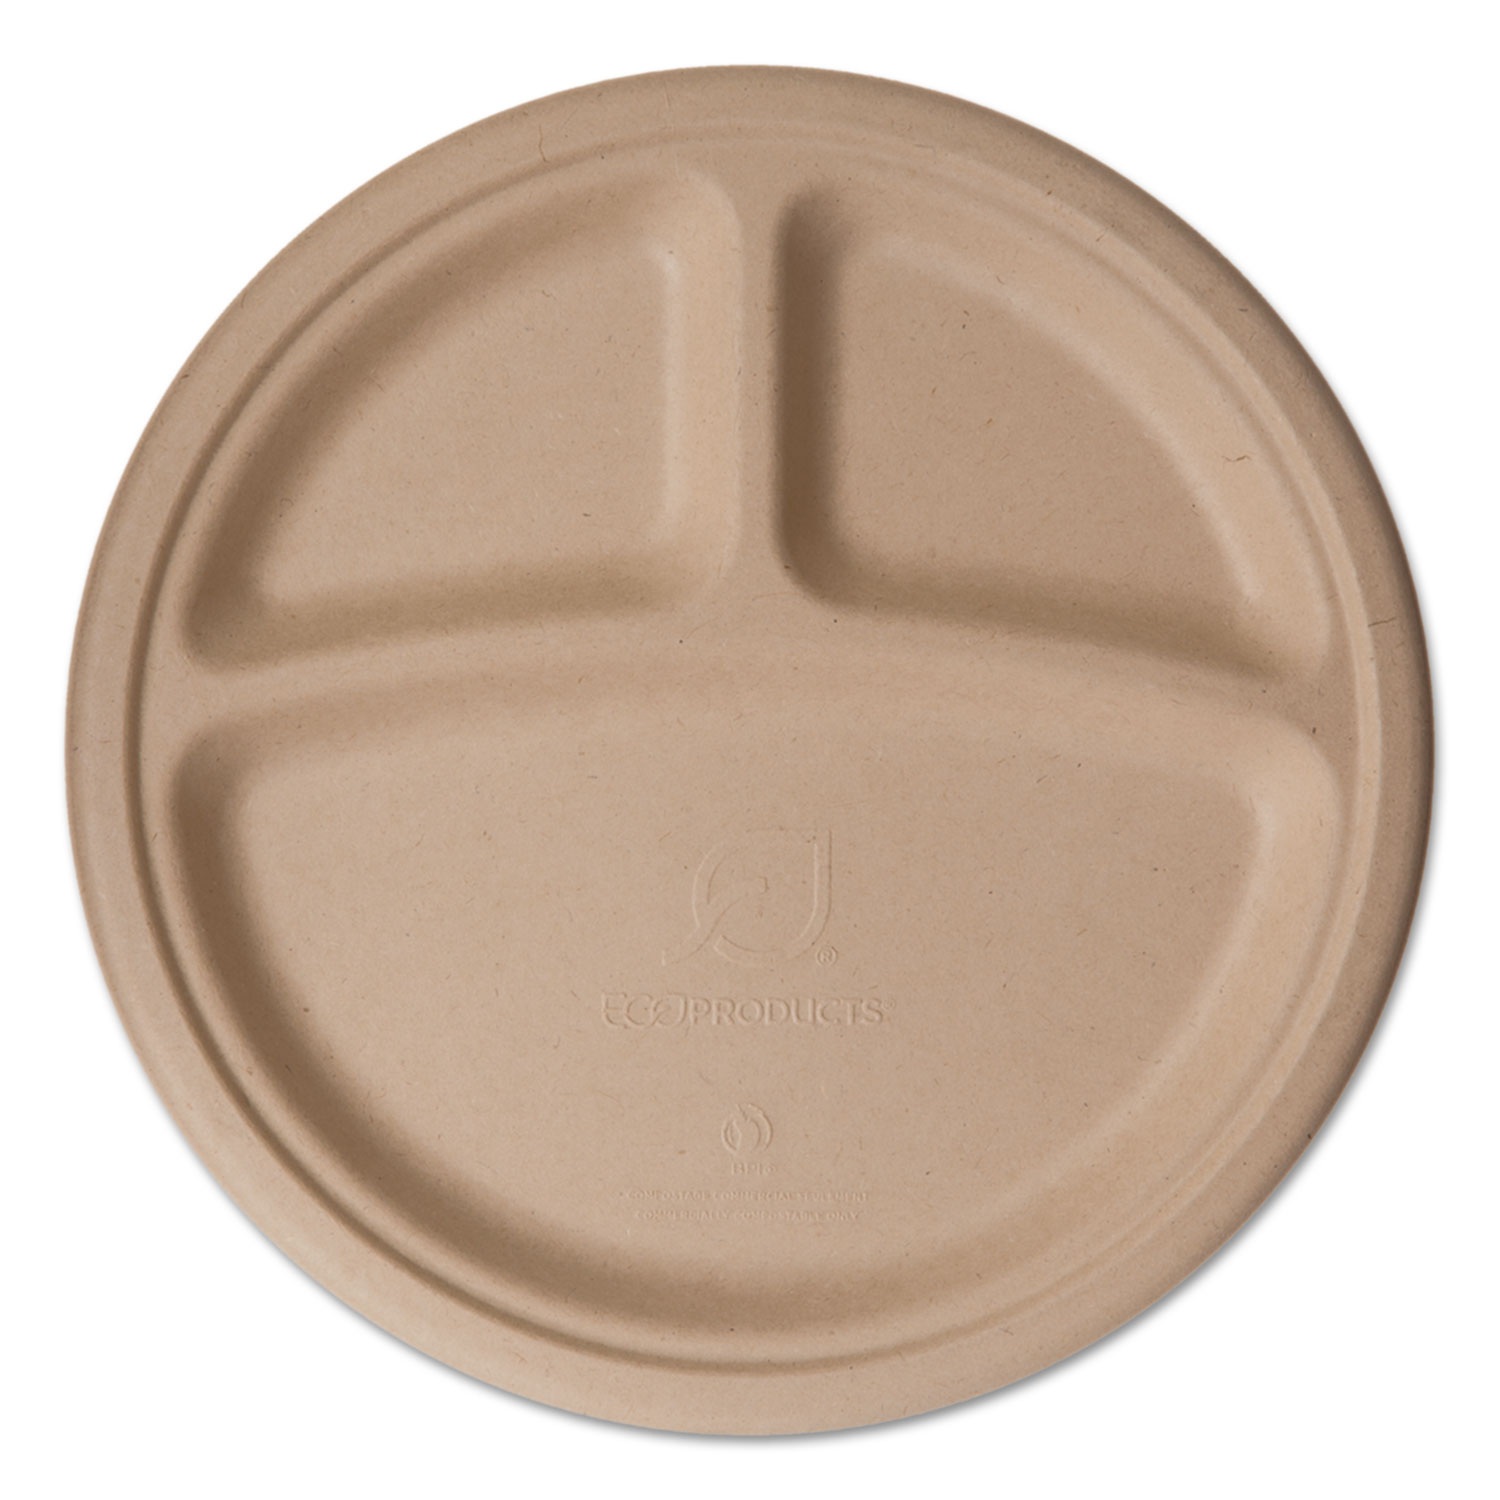  Eco-Products EP-PW103 Wheat Straw Dinnerware, 3 Compartment Plate, 10 Diameter, 500/Carton (ECOEPPW103) 